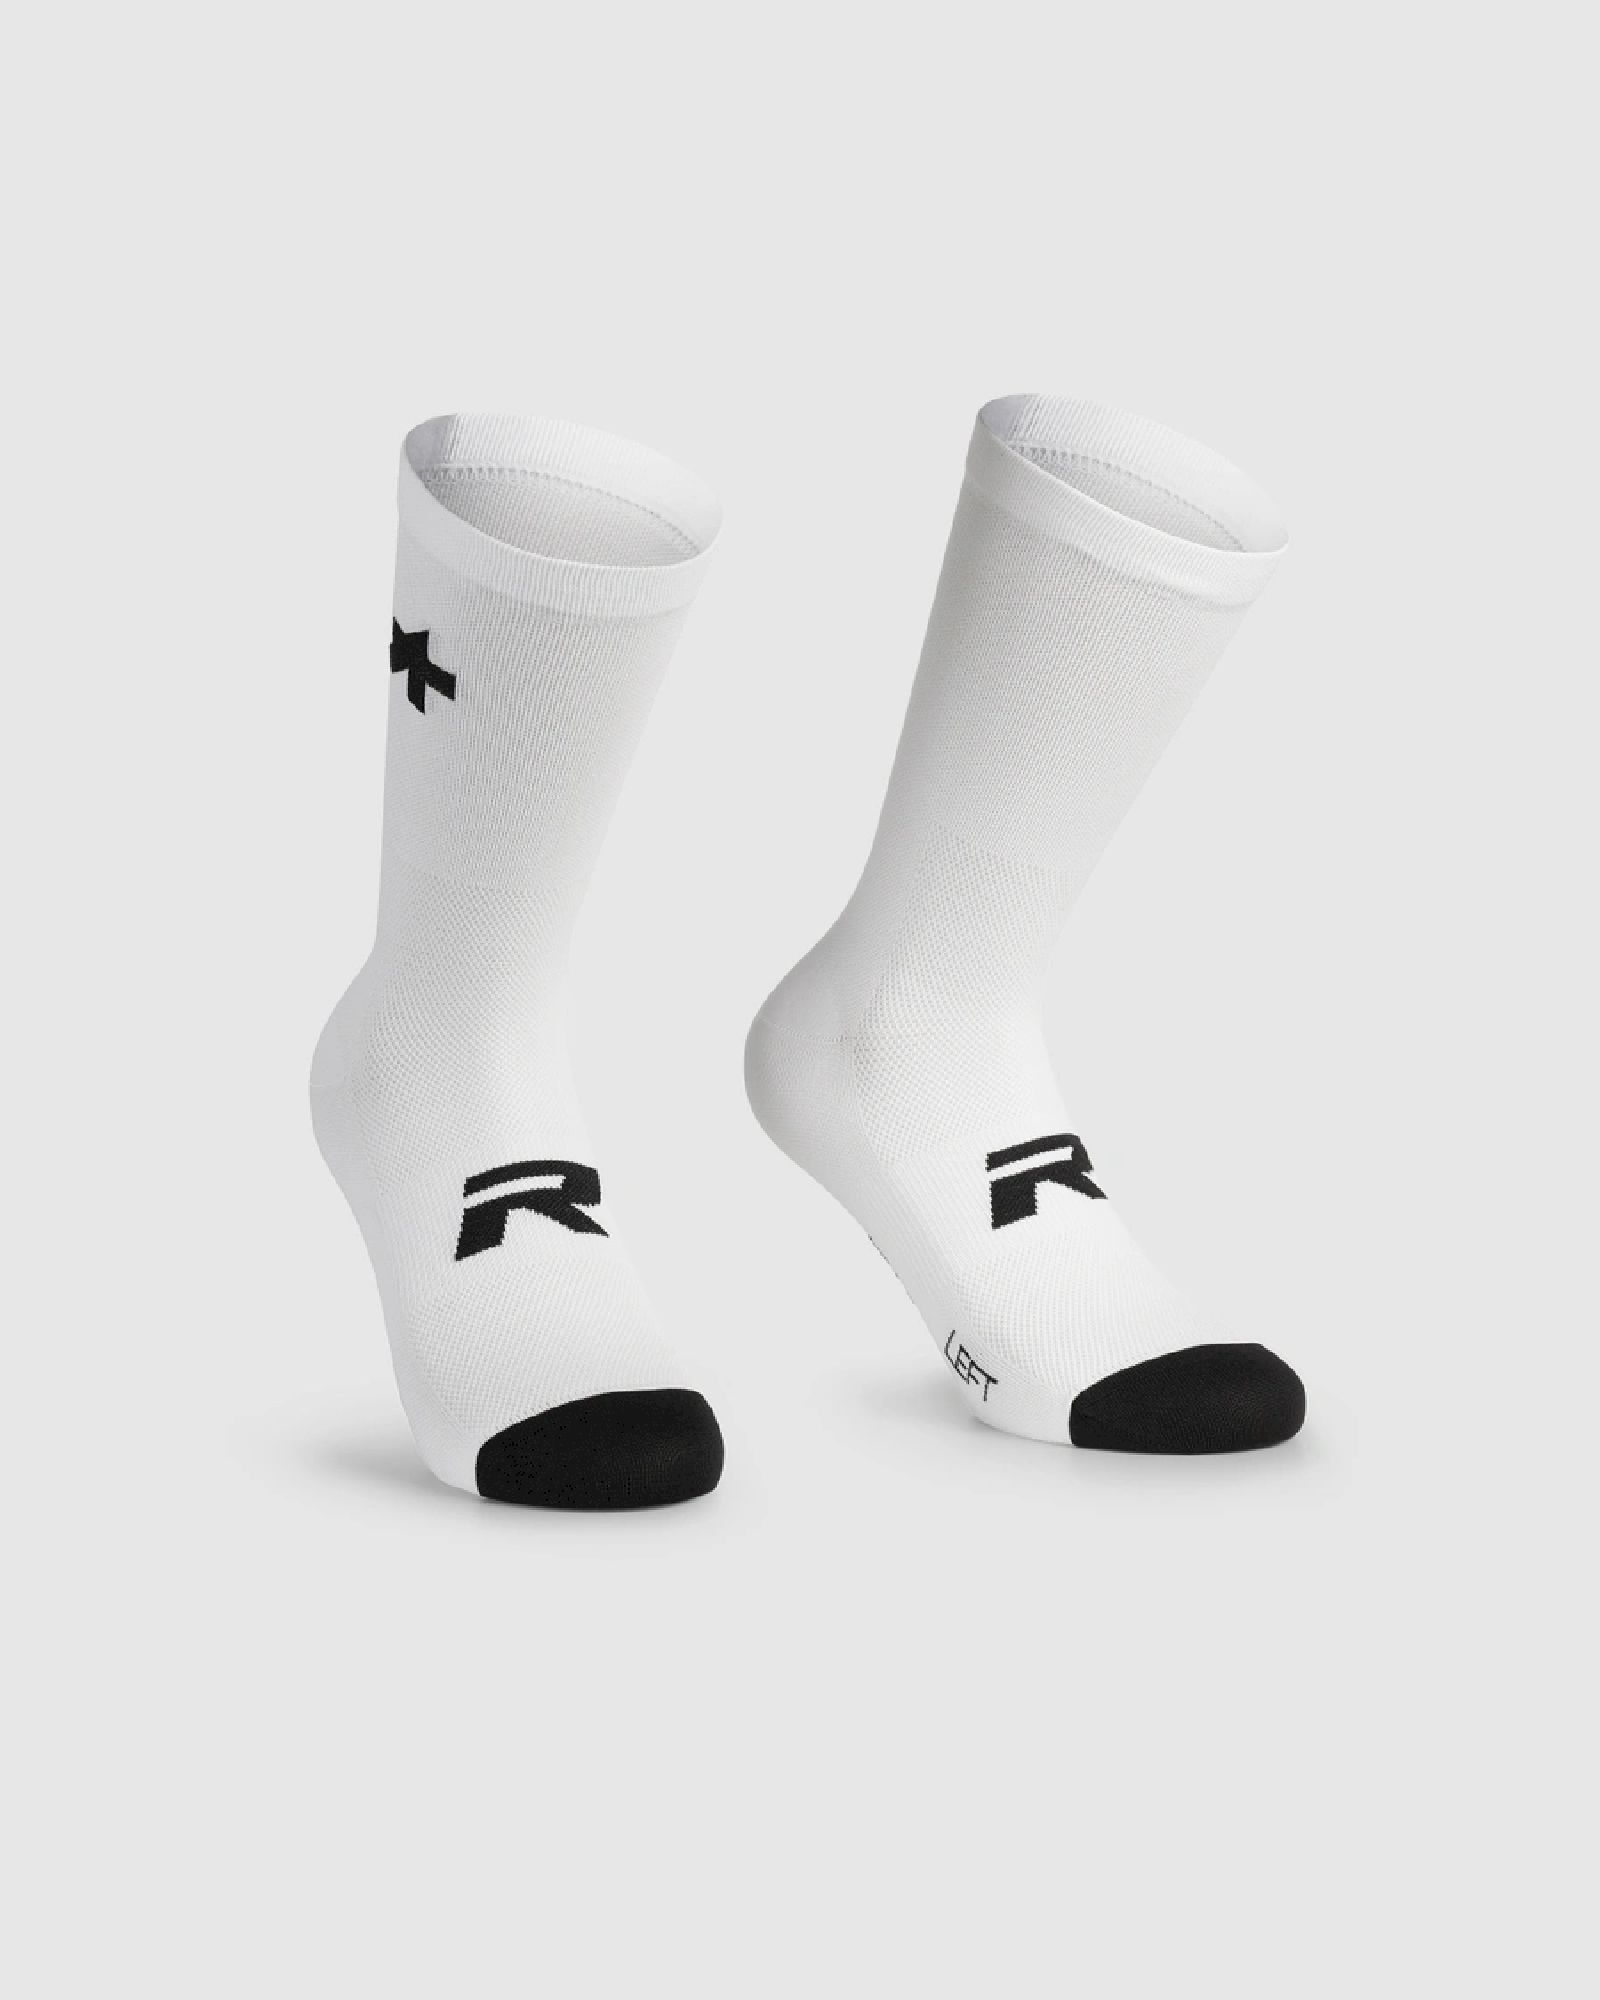 Assos R Socks S9 Twin Pack - Chaussettes vélo | Hardloop